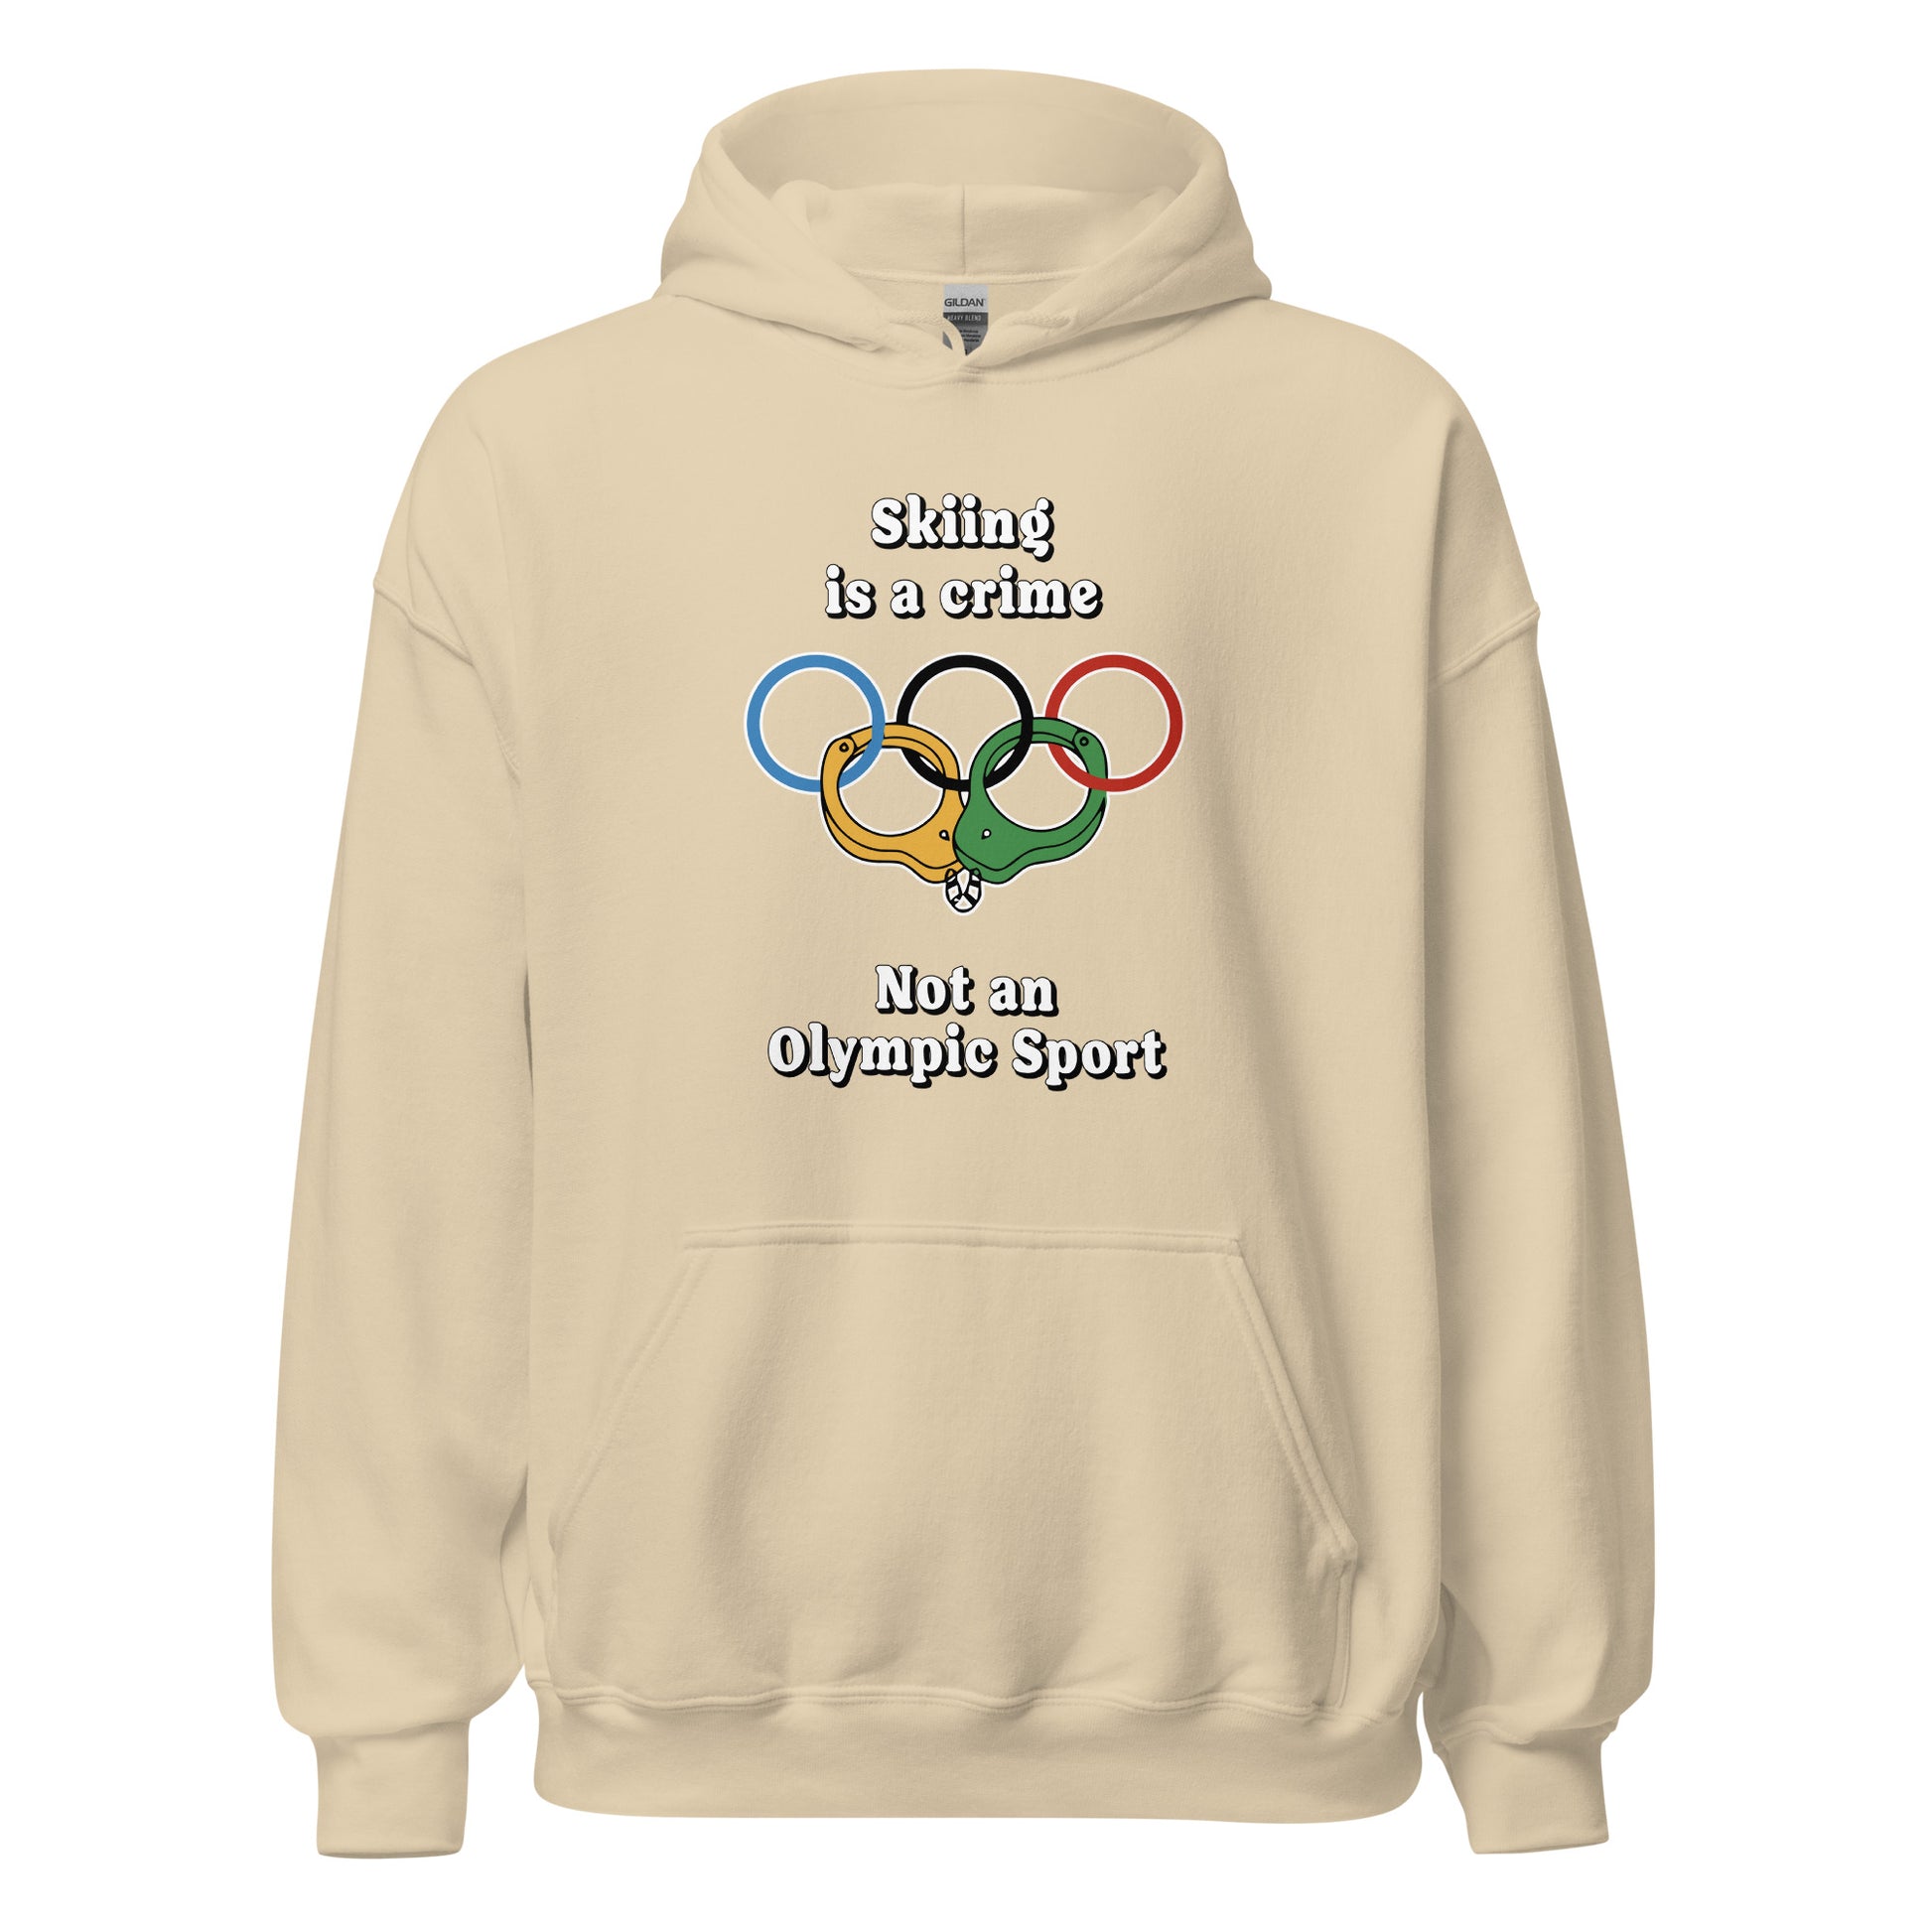 Skiing is a crime not an olympic sport design printed on a hoodie by Whistler Shirts